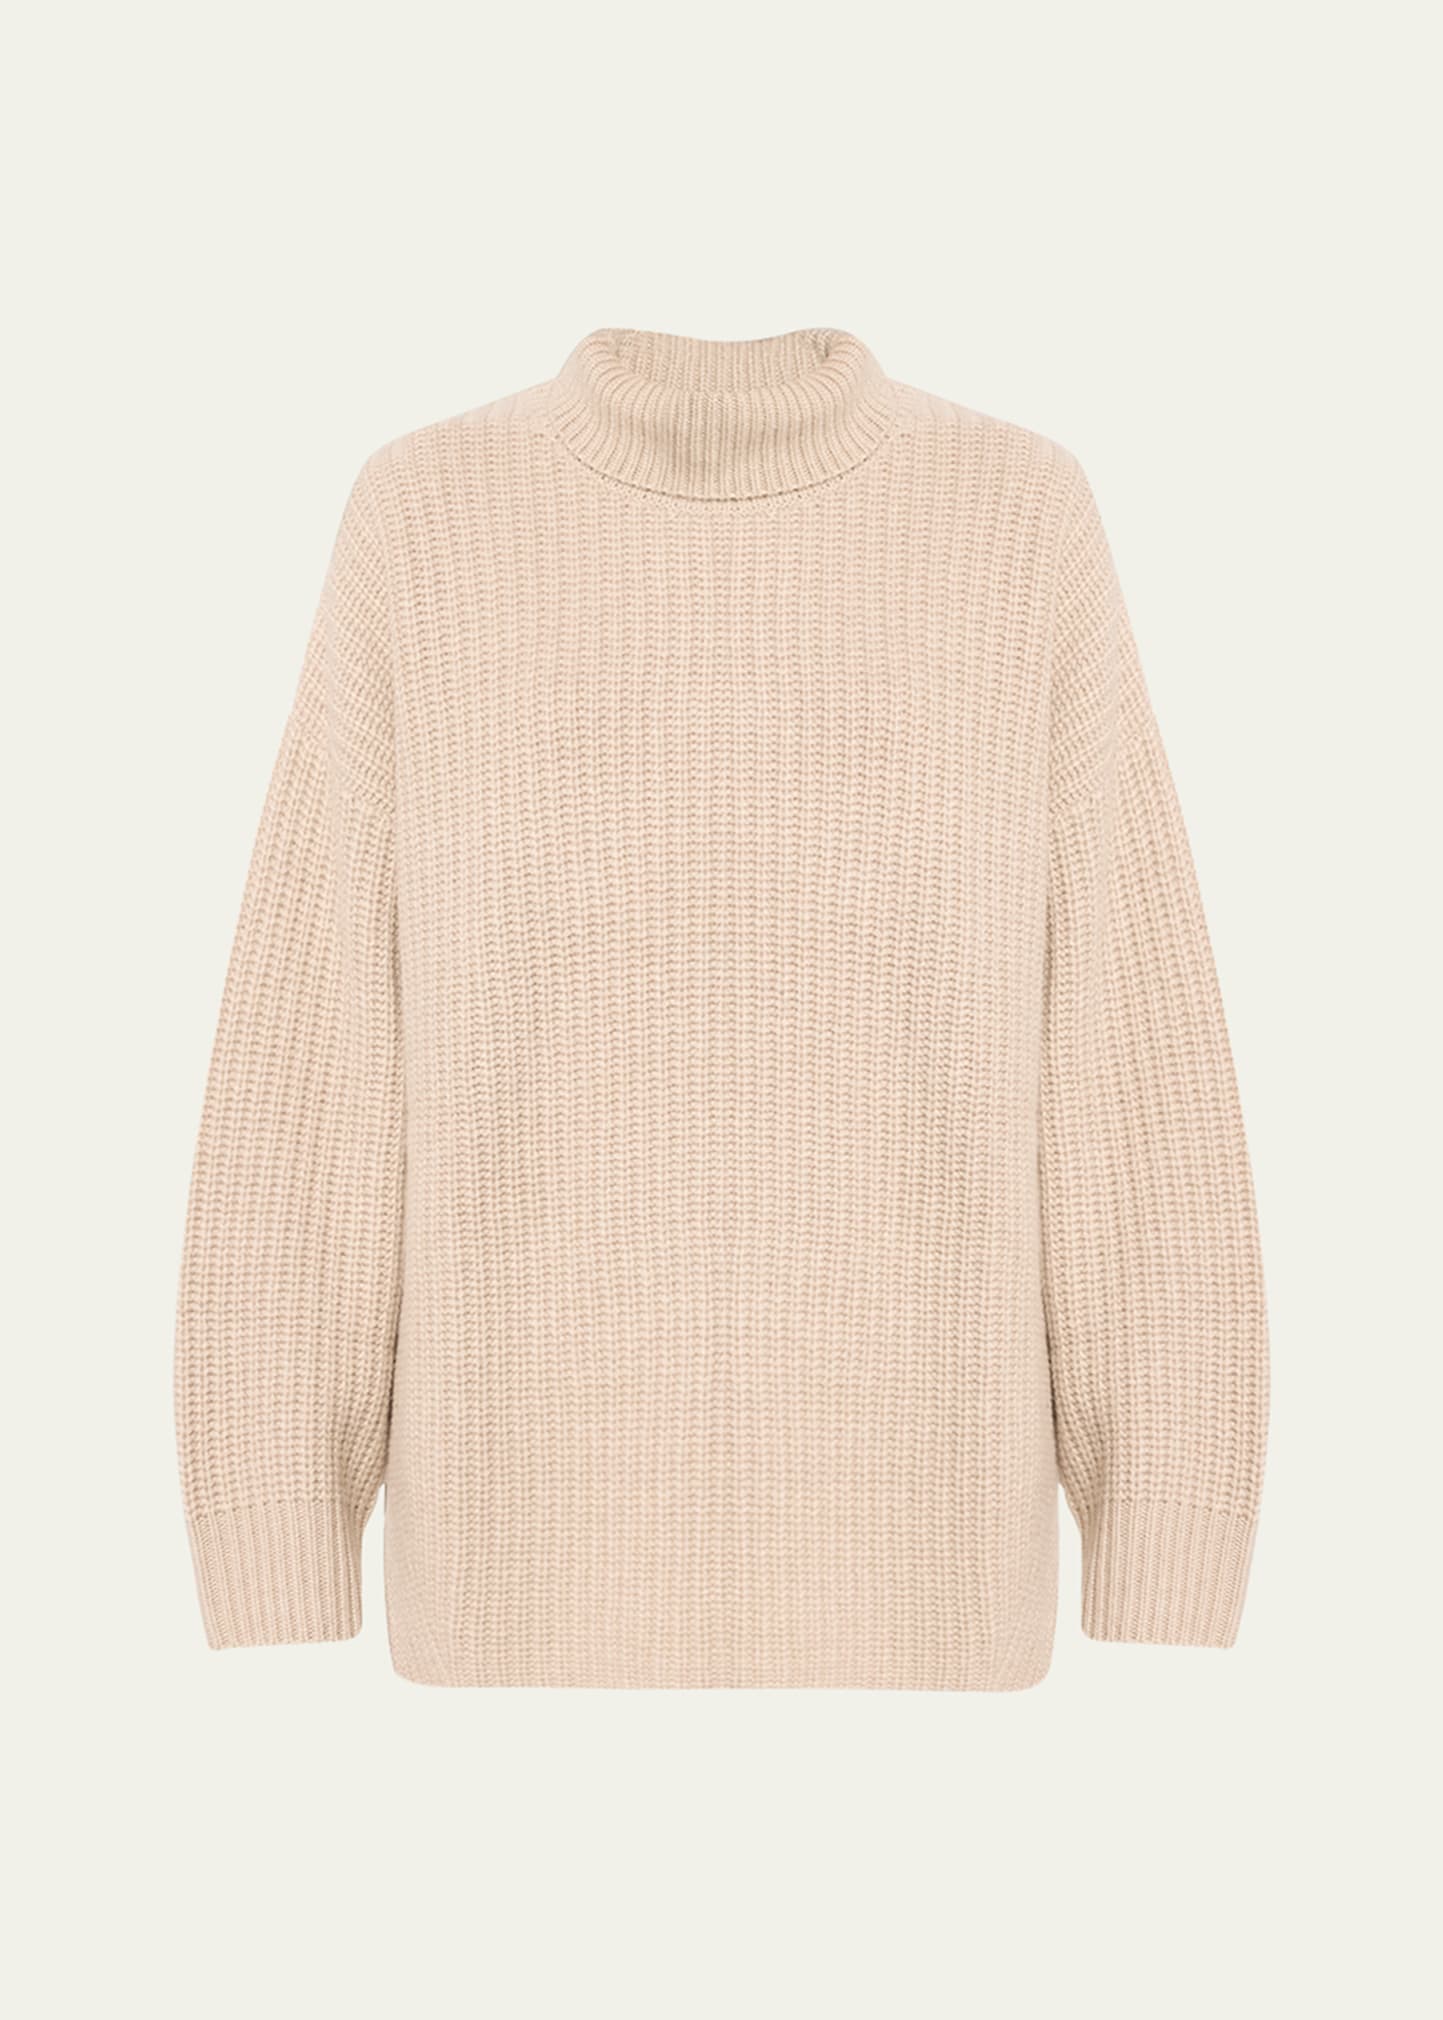 Therese Cashmere Ribbed Turtleneck Sweater